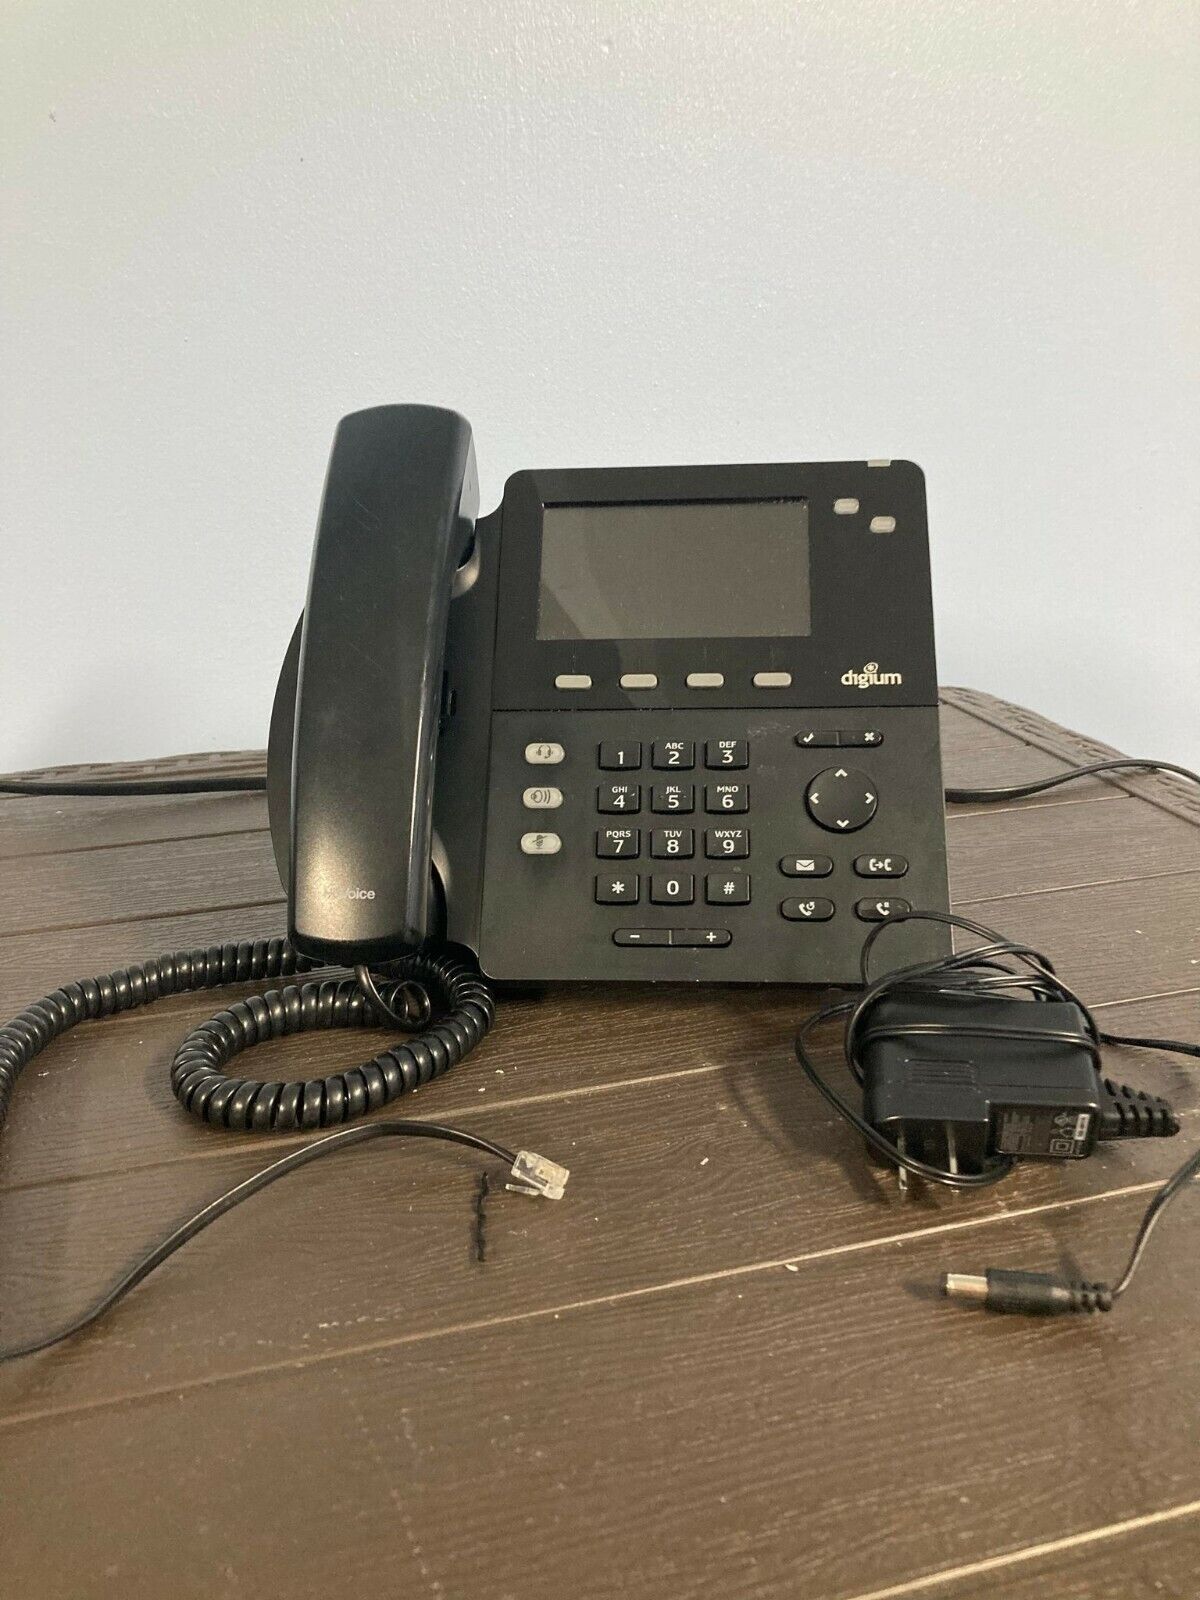 Digium D60 VoIP Phone With power chord and hand set (pulled from active use)